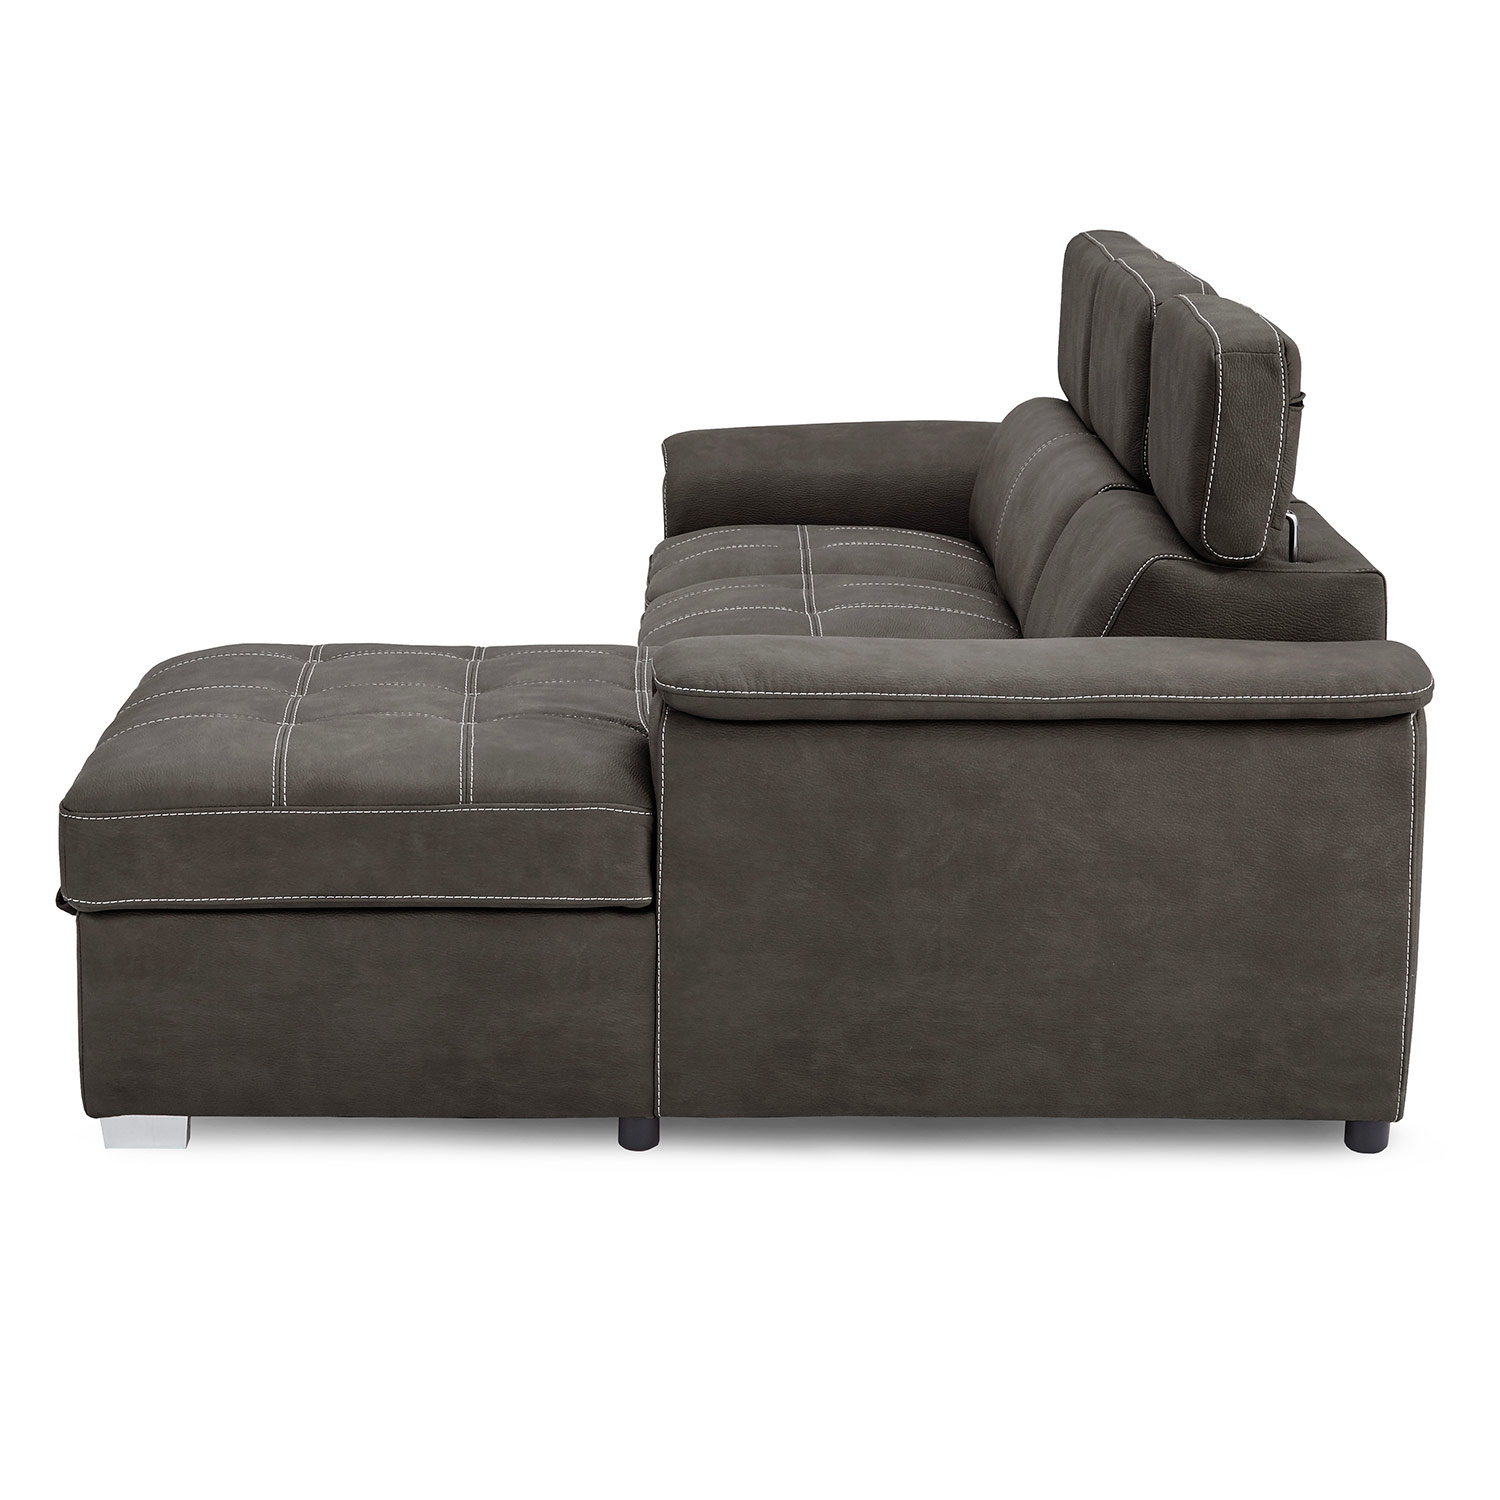 Homelegance Ferriday Sectional with Pull-out Bed and Hidden Storage - Taupe